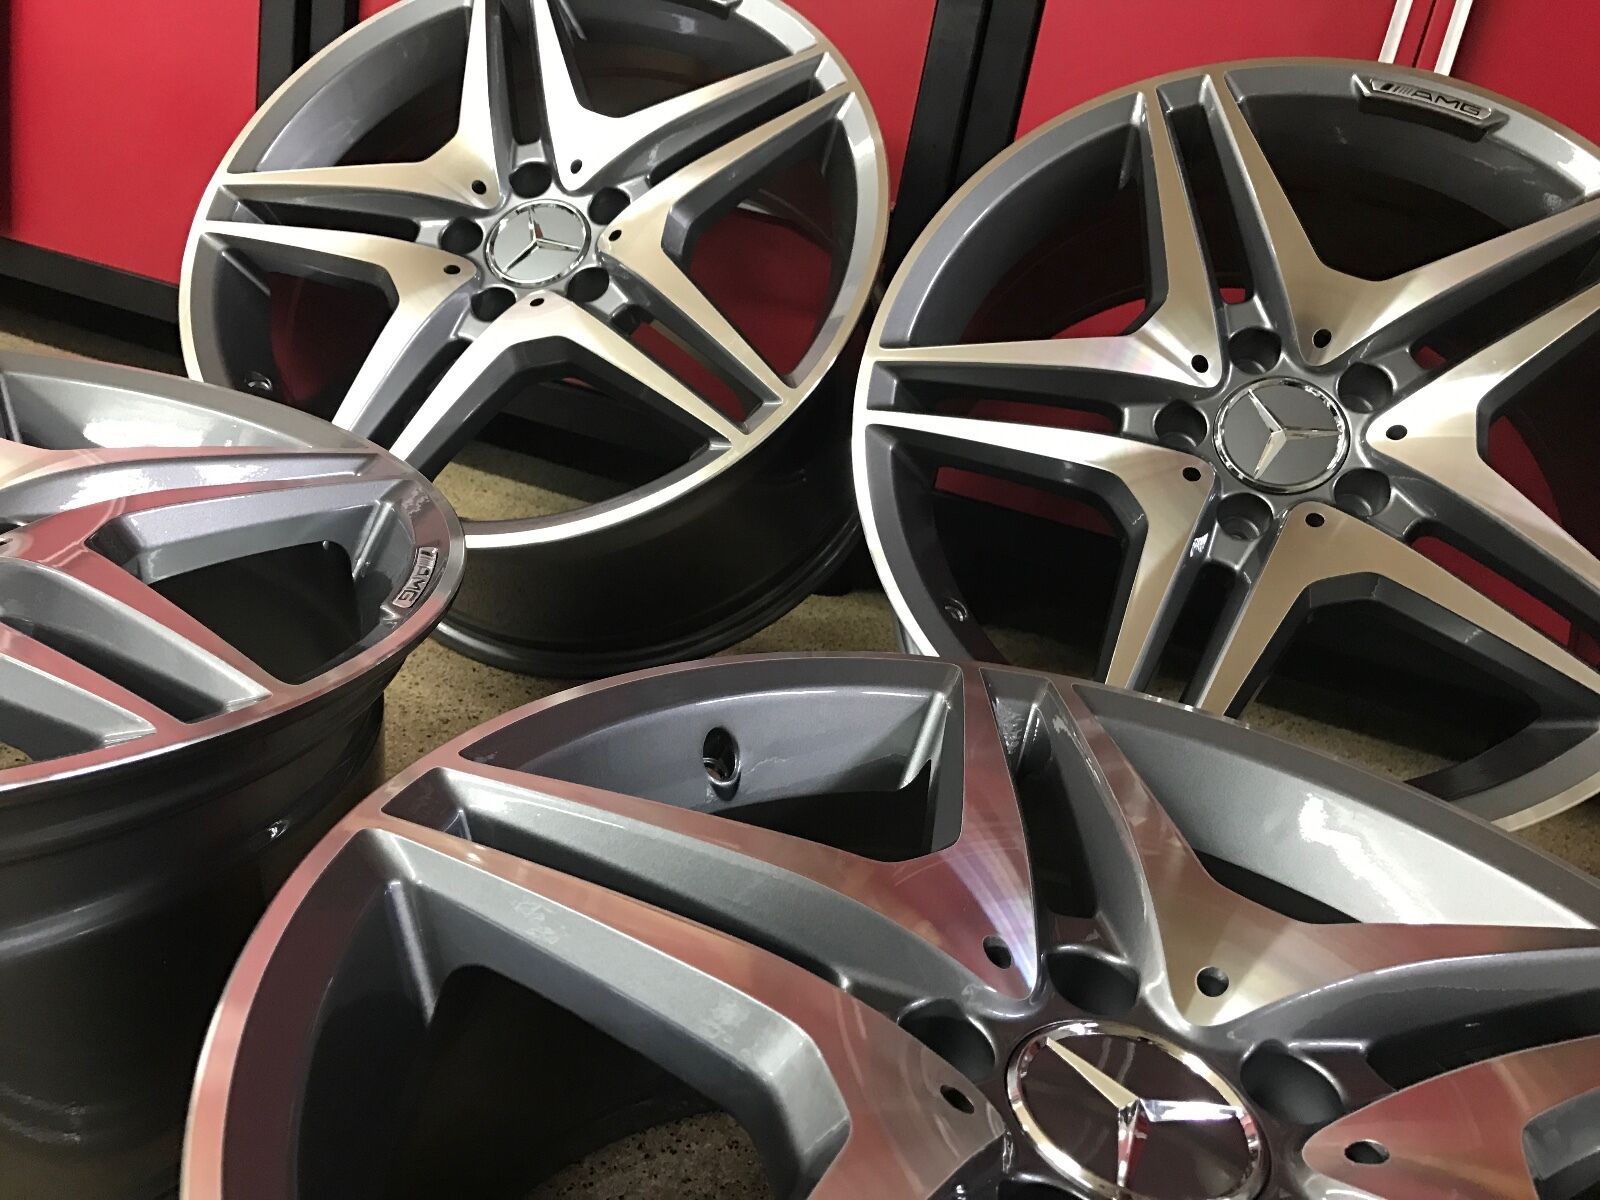 MERCEDES 19 IN CLS63 RIMS WHEELS SET4 NEW FITS ALL CLS550 CLS500 CLS55 CLS AMG